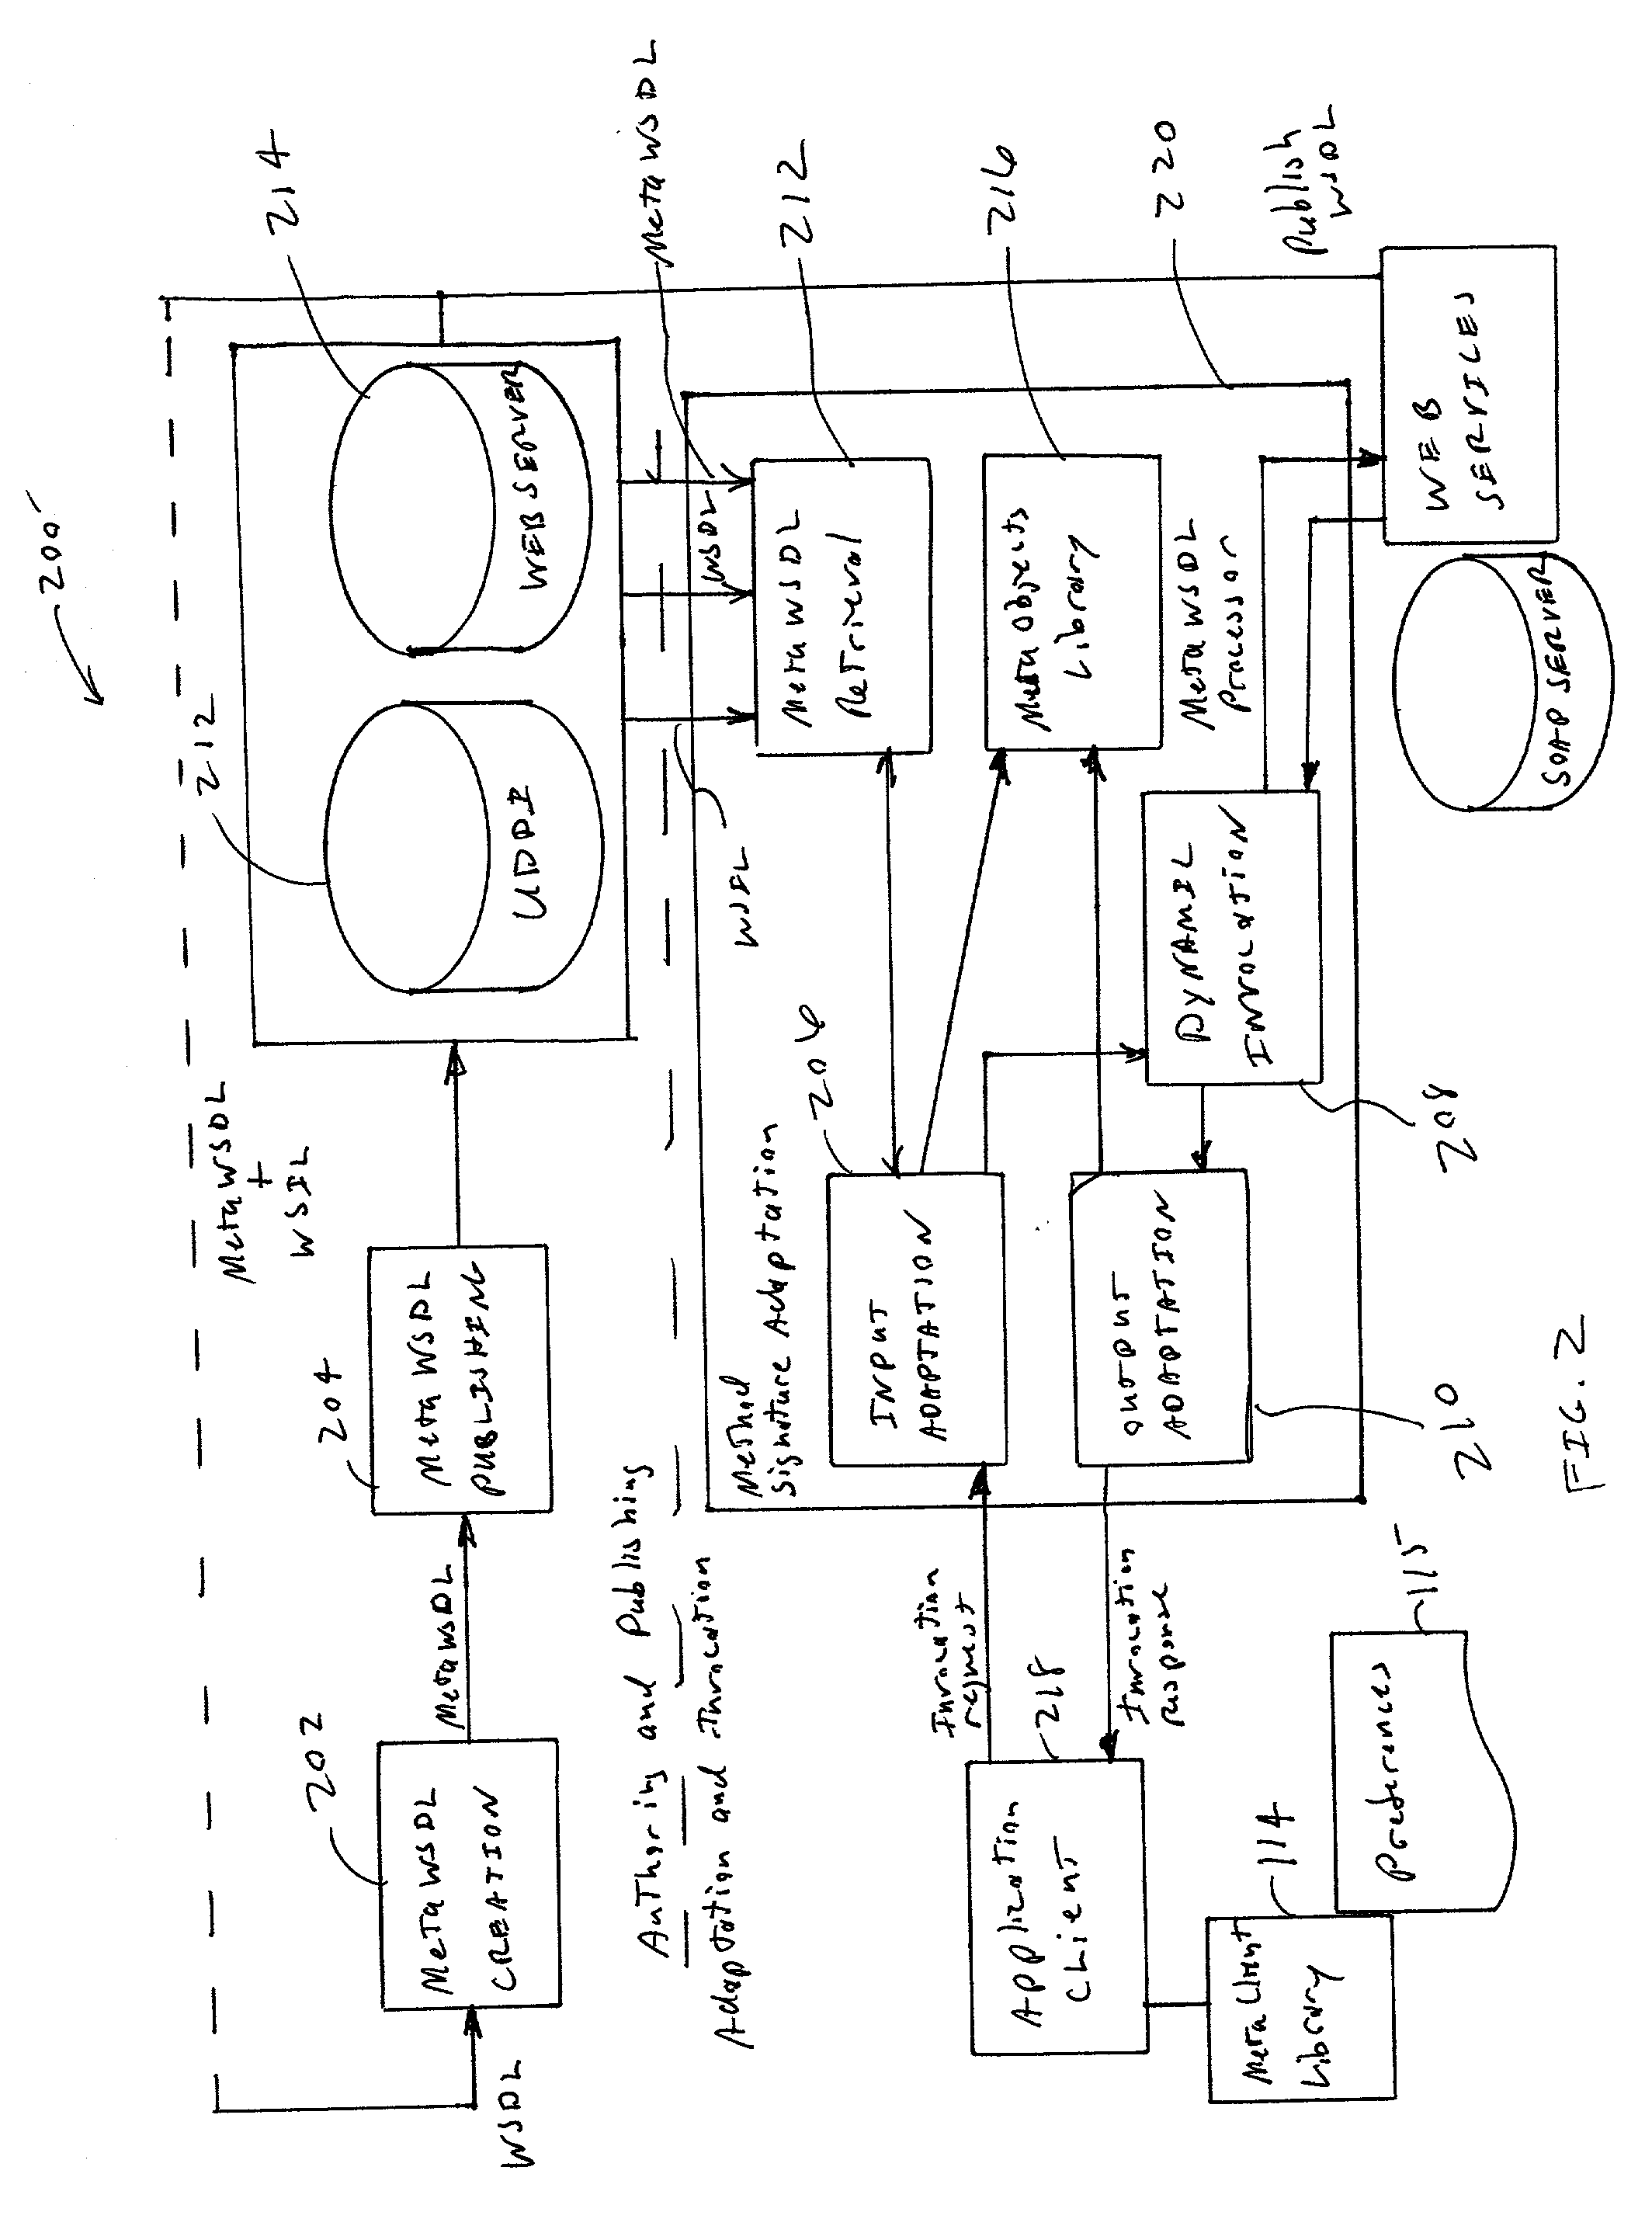 Method and apparatus of automatic method signature adaptation for dynamic web service invocation